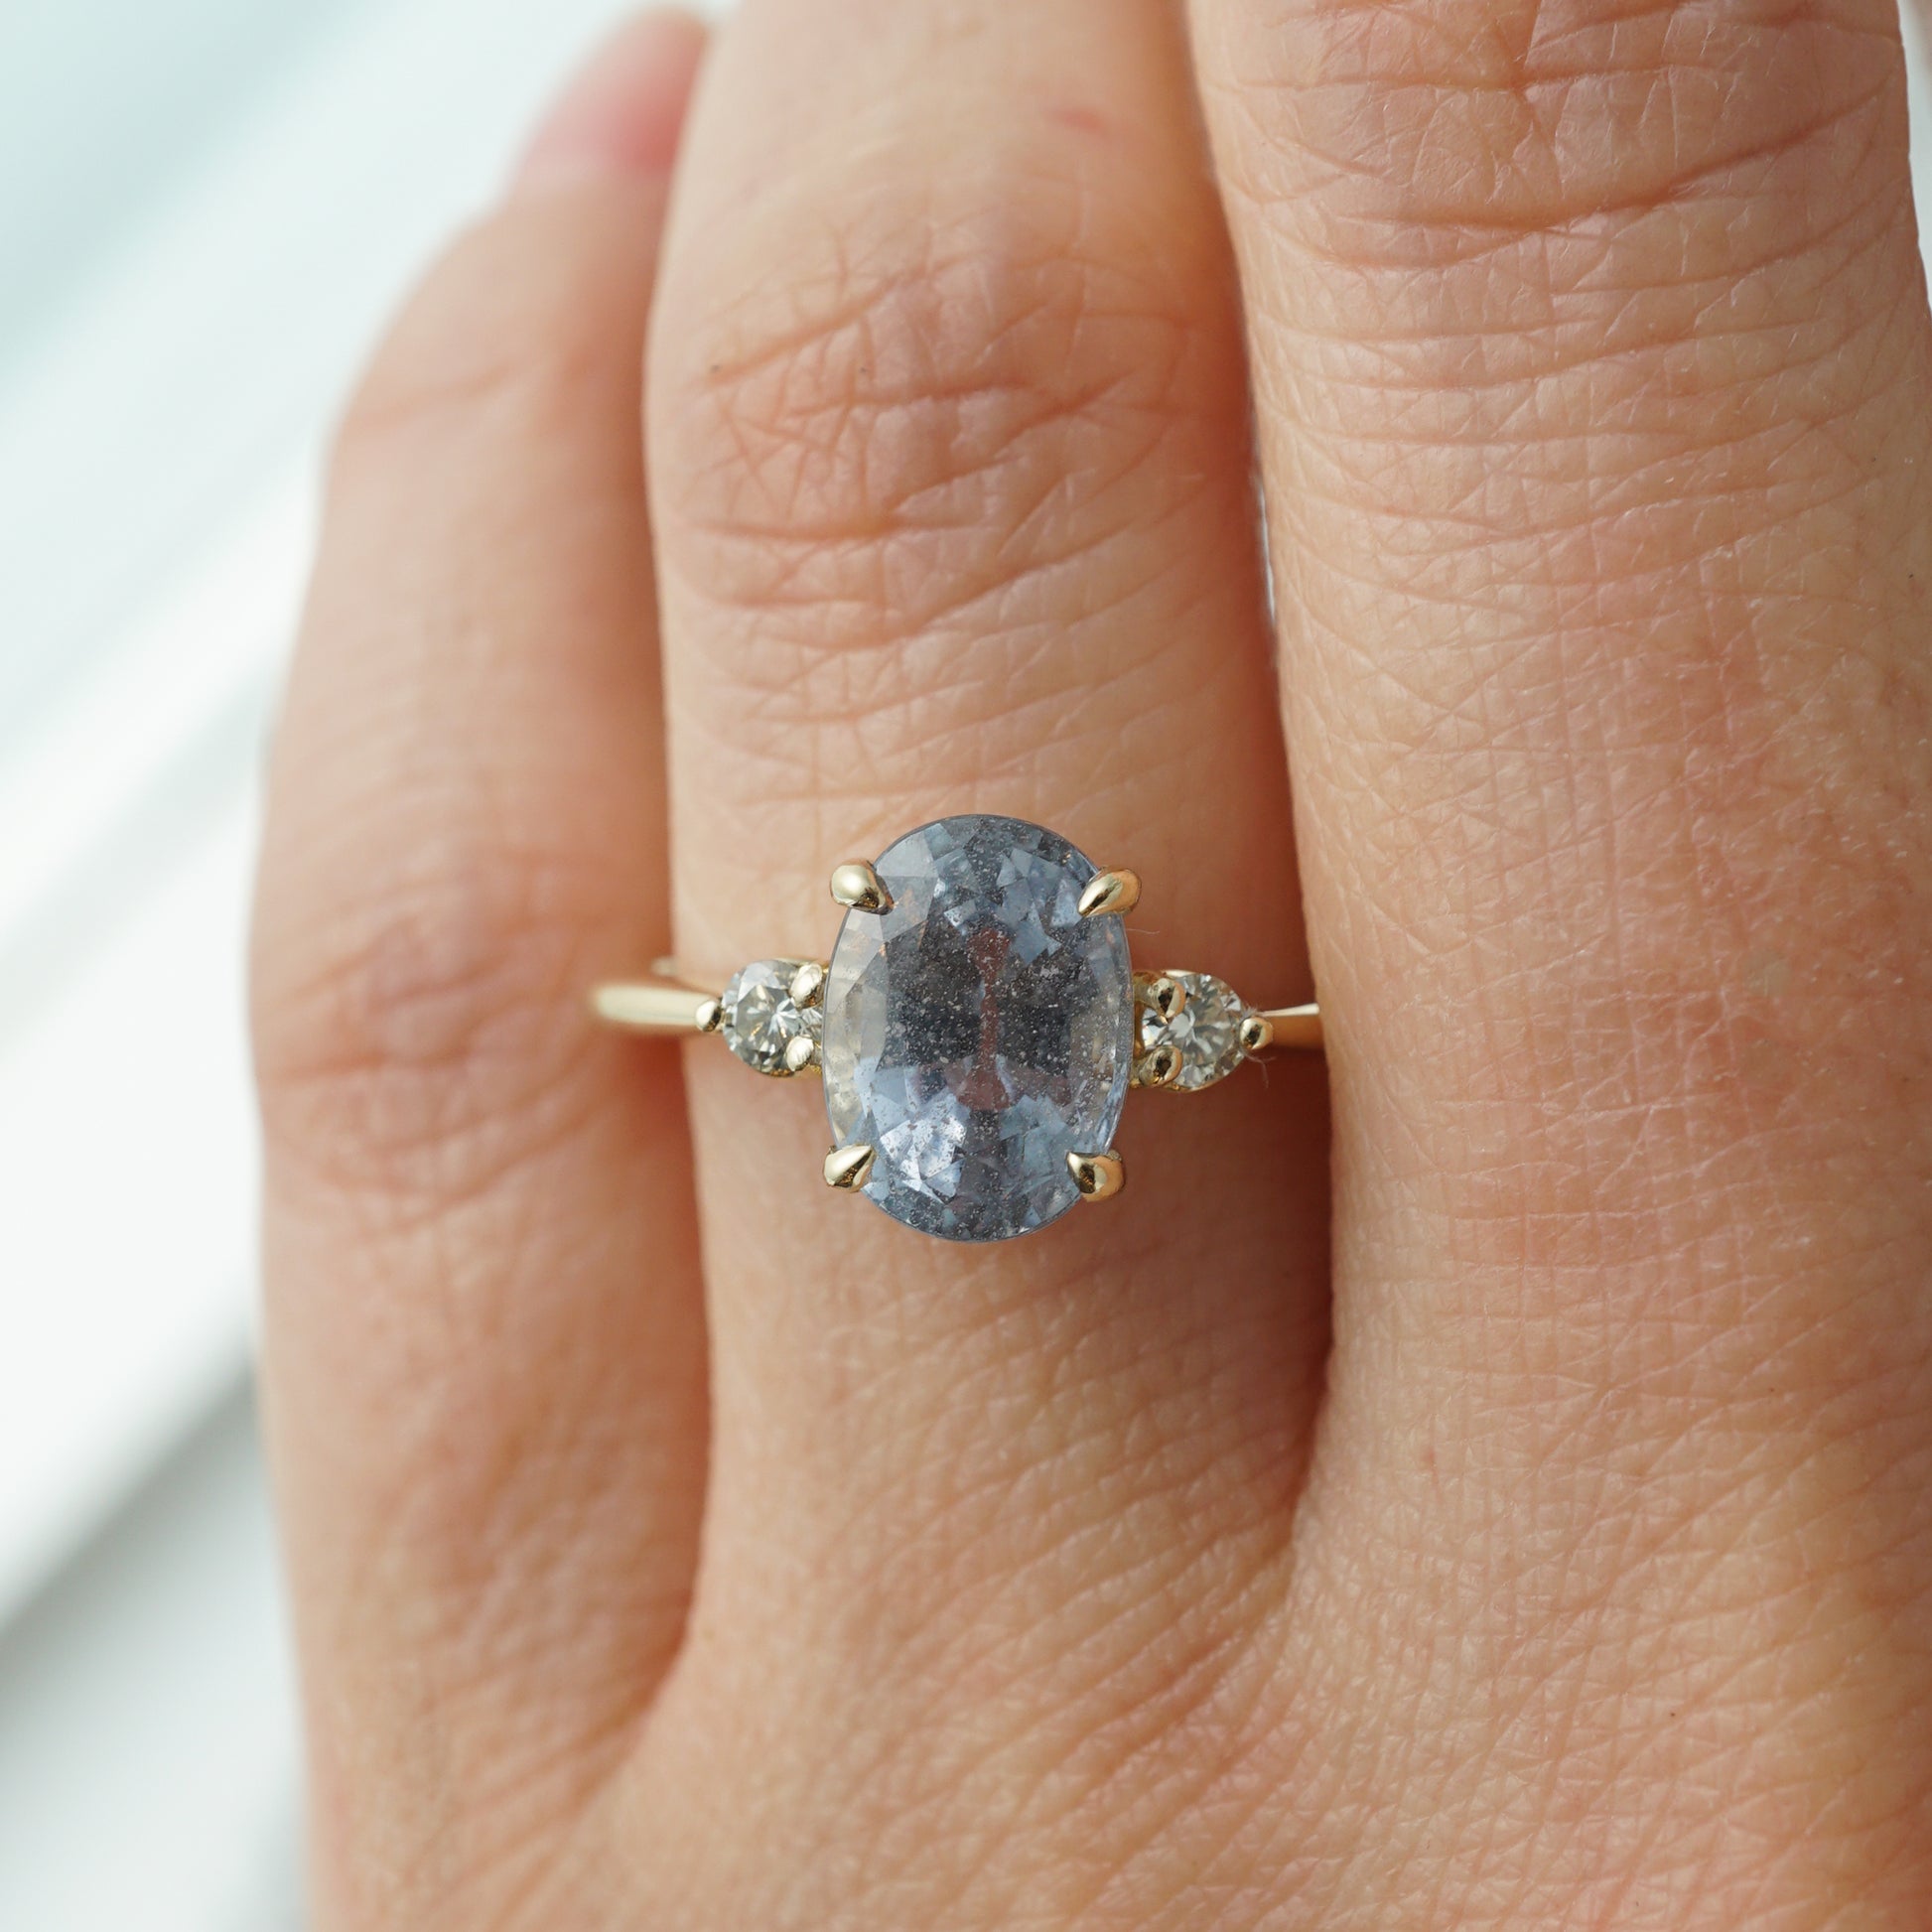 Oval Cut Lavender Sapphire Engagement Ring in Yellow GoldComposition: PlatinumRing Size: 7Total Diamond Weight: .06 ctTotal Gram Weight: 3.2 gInscription: 14k